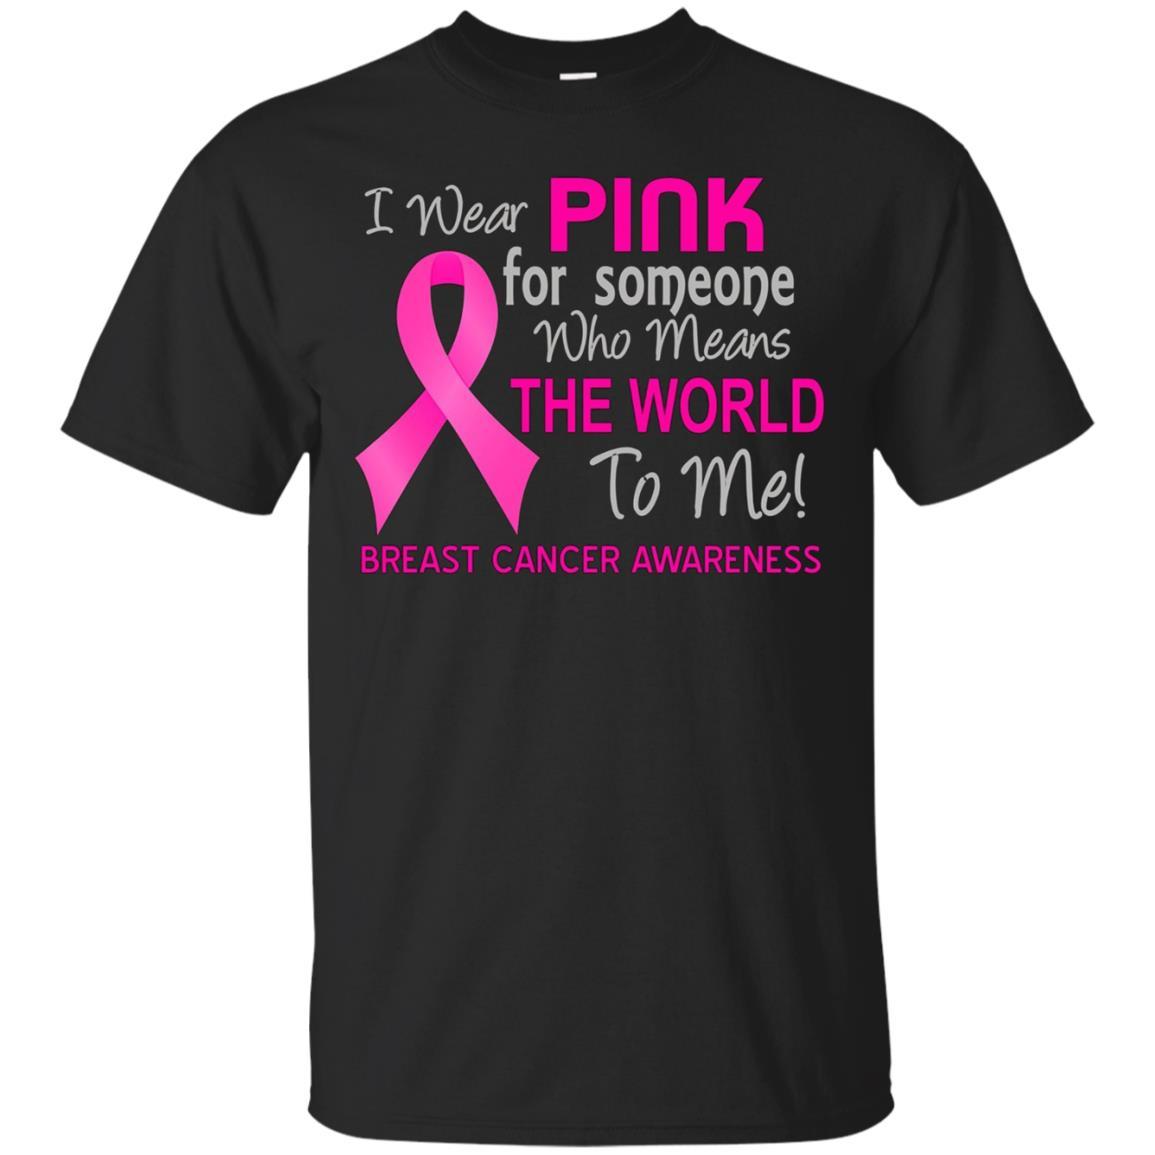 Breast Cancer T-shirt Pink For Someone Who Means World To Me